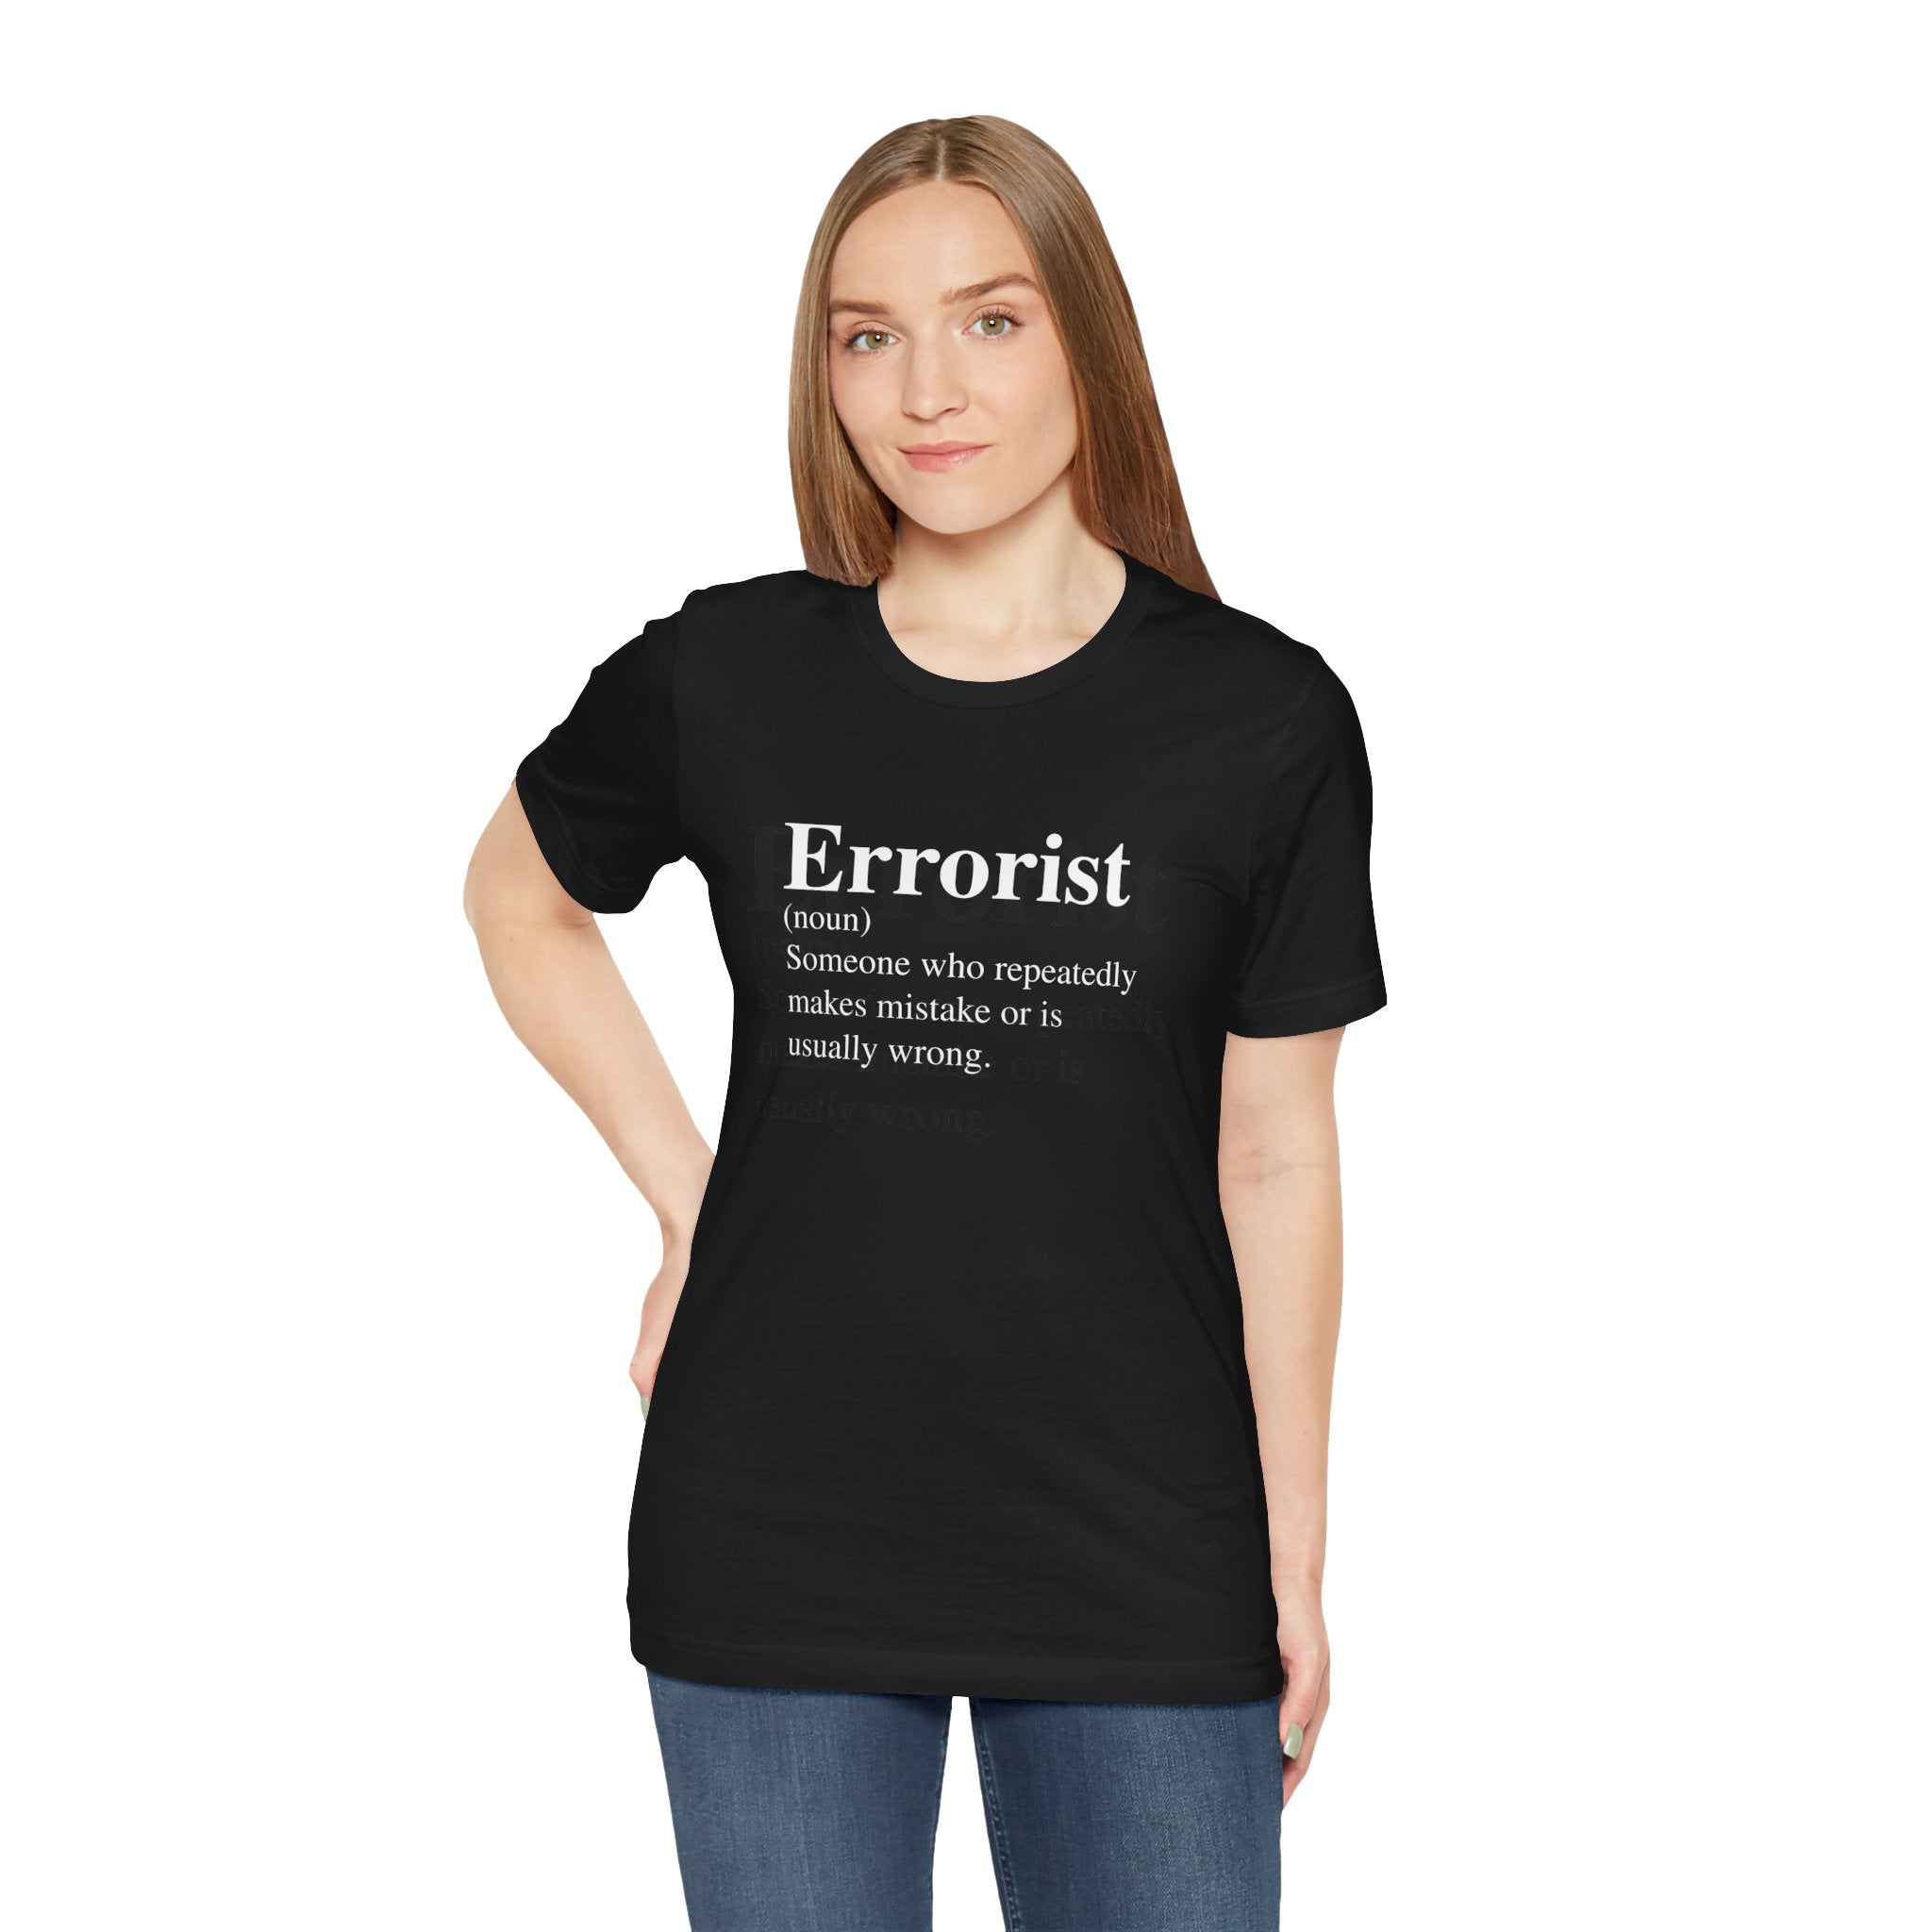 Young woman wearing an Errorist T-Shirt with the word "Errorist" and its humorous definition printed in white.